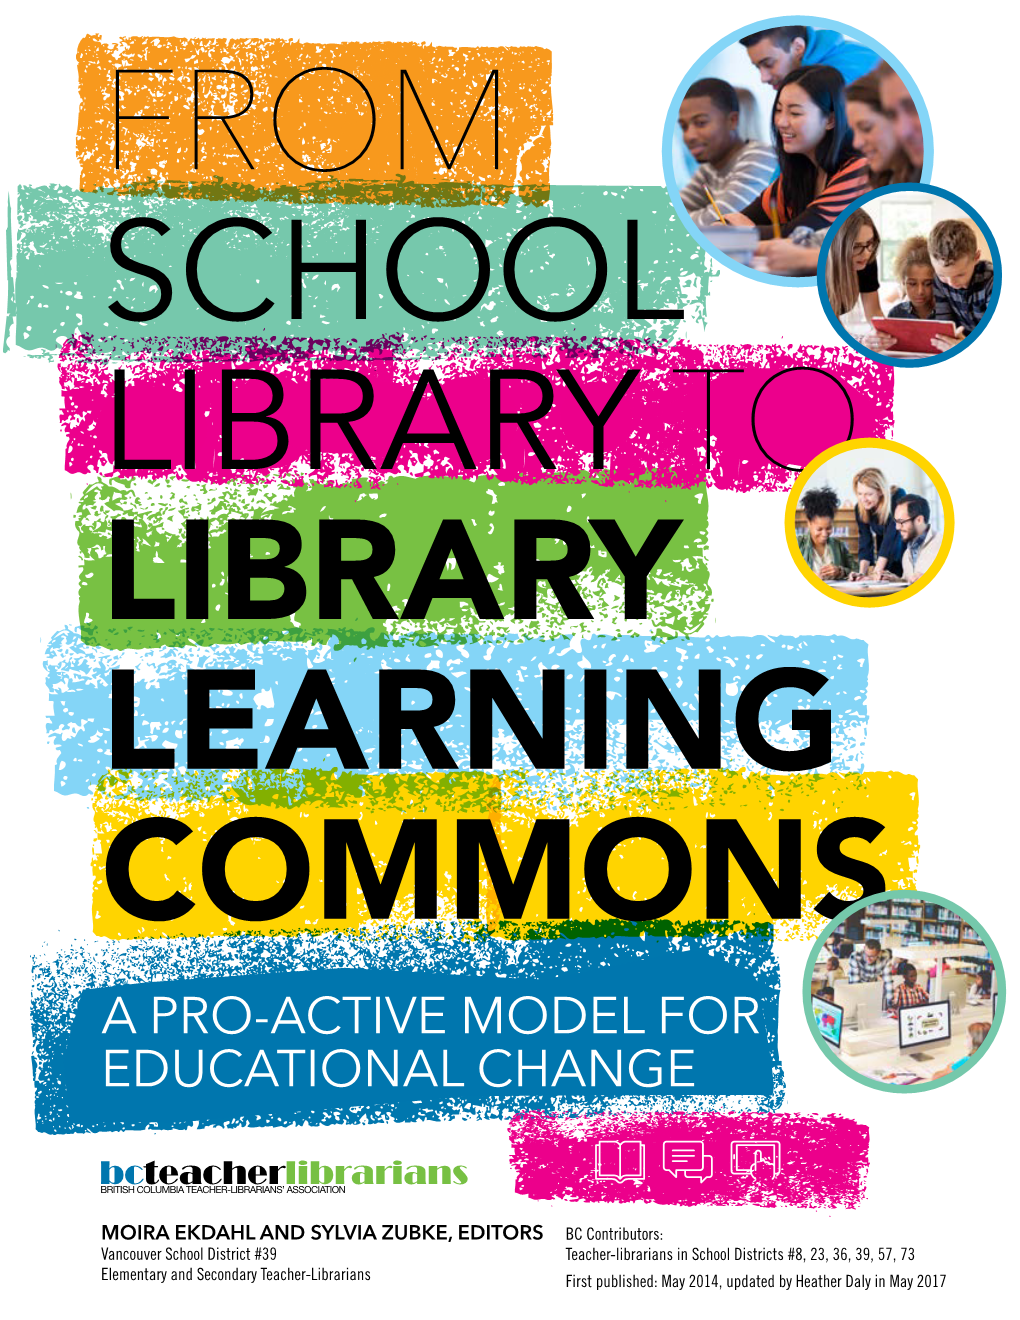 From School Library to Library Learning Commons: a Pro-Active Model For